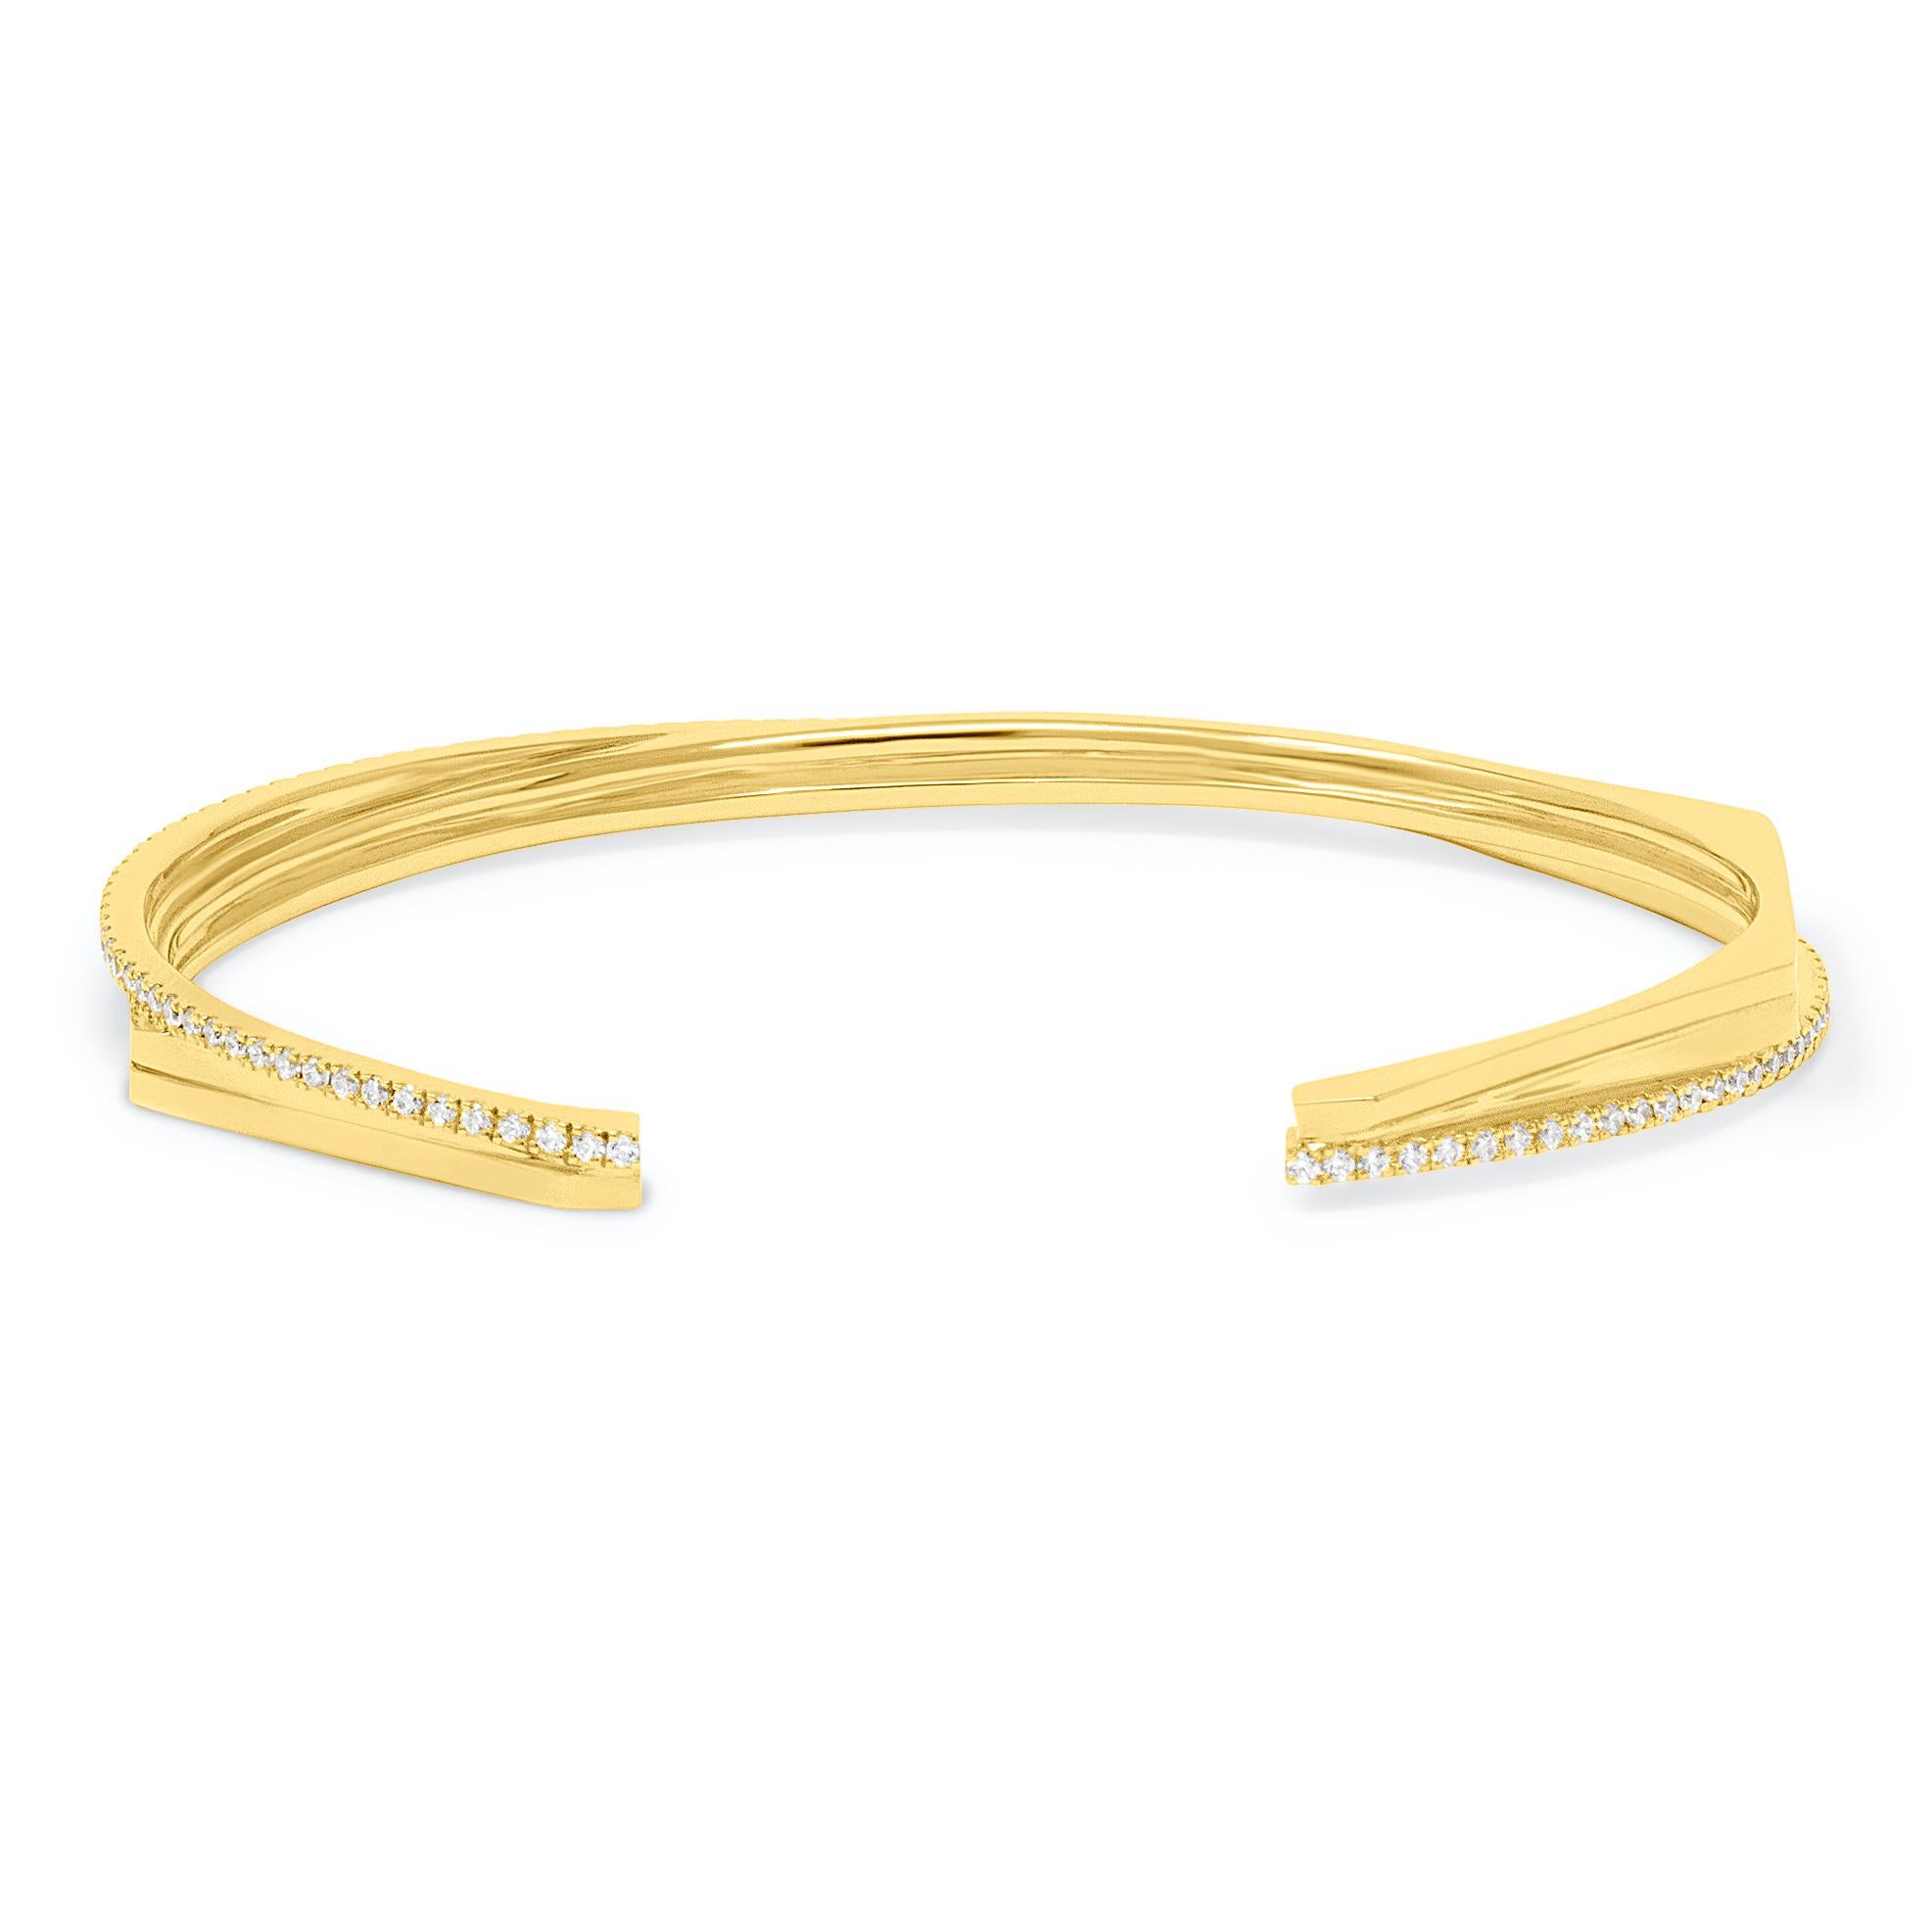  Halo Bangle in 18k yellow gold with 2.12ct of white diamonds pave inspired by galaxy, physics and geometry. The earth-orbiting moon inspires the asymmetrical line of pave diamonds, representing love and guardianship.

Diamond Information:
Type: